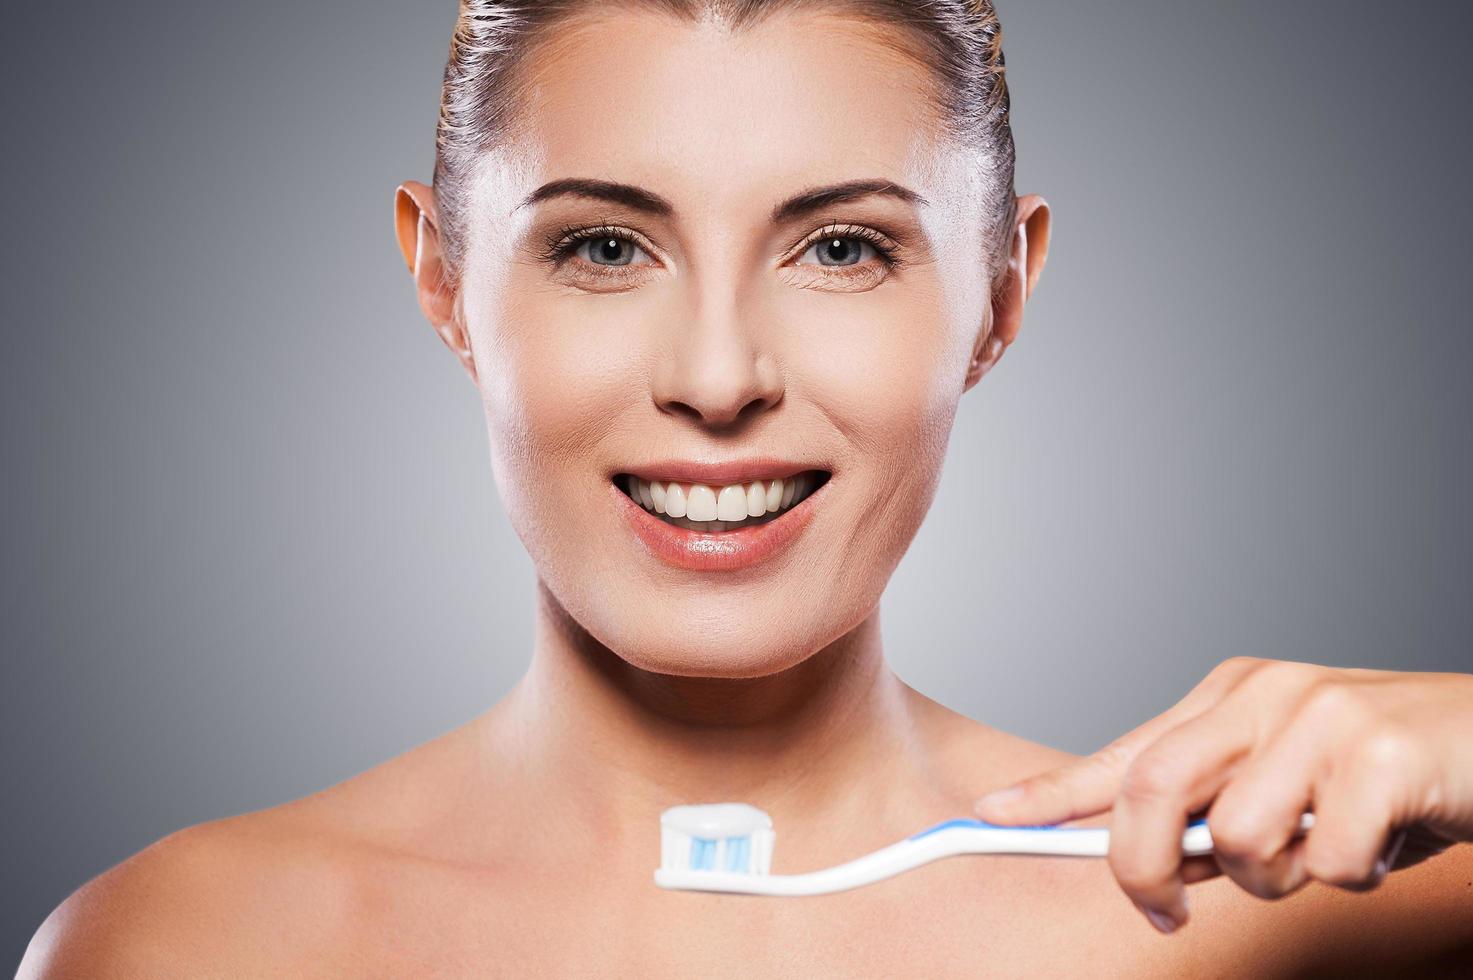 Teeth care. Beautiful mature woman holding toothbrush near her mouth and smiling at camera while standing against grey background photo